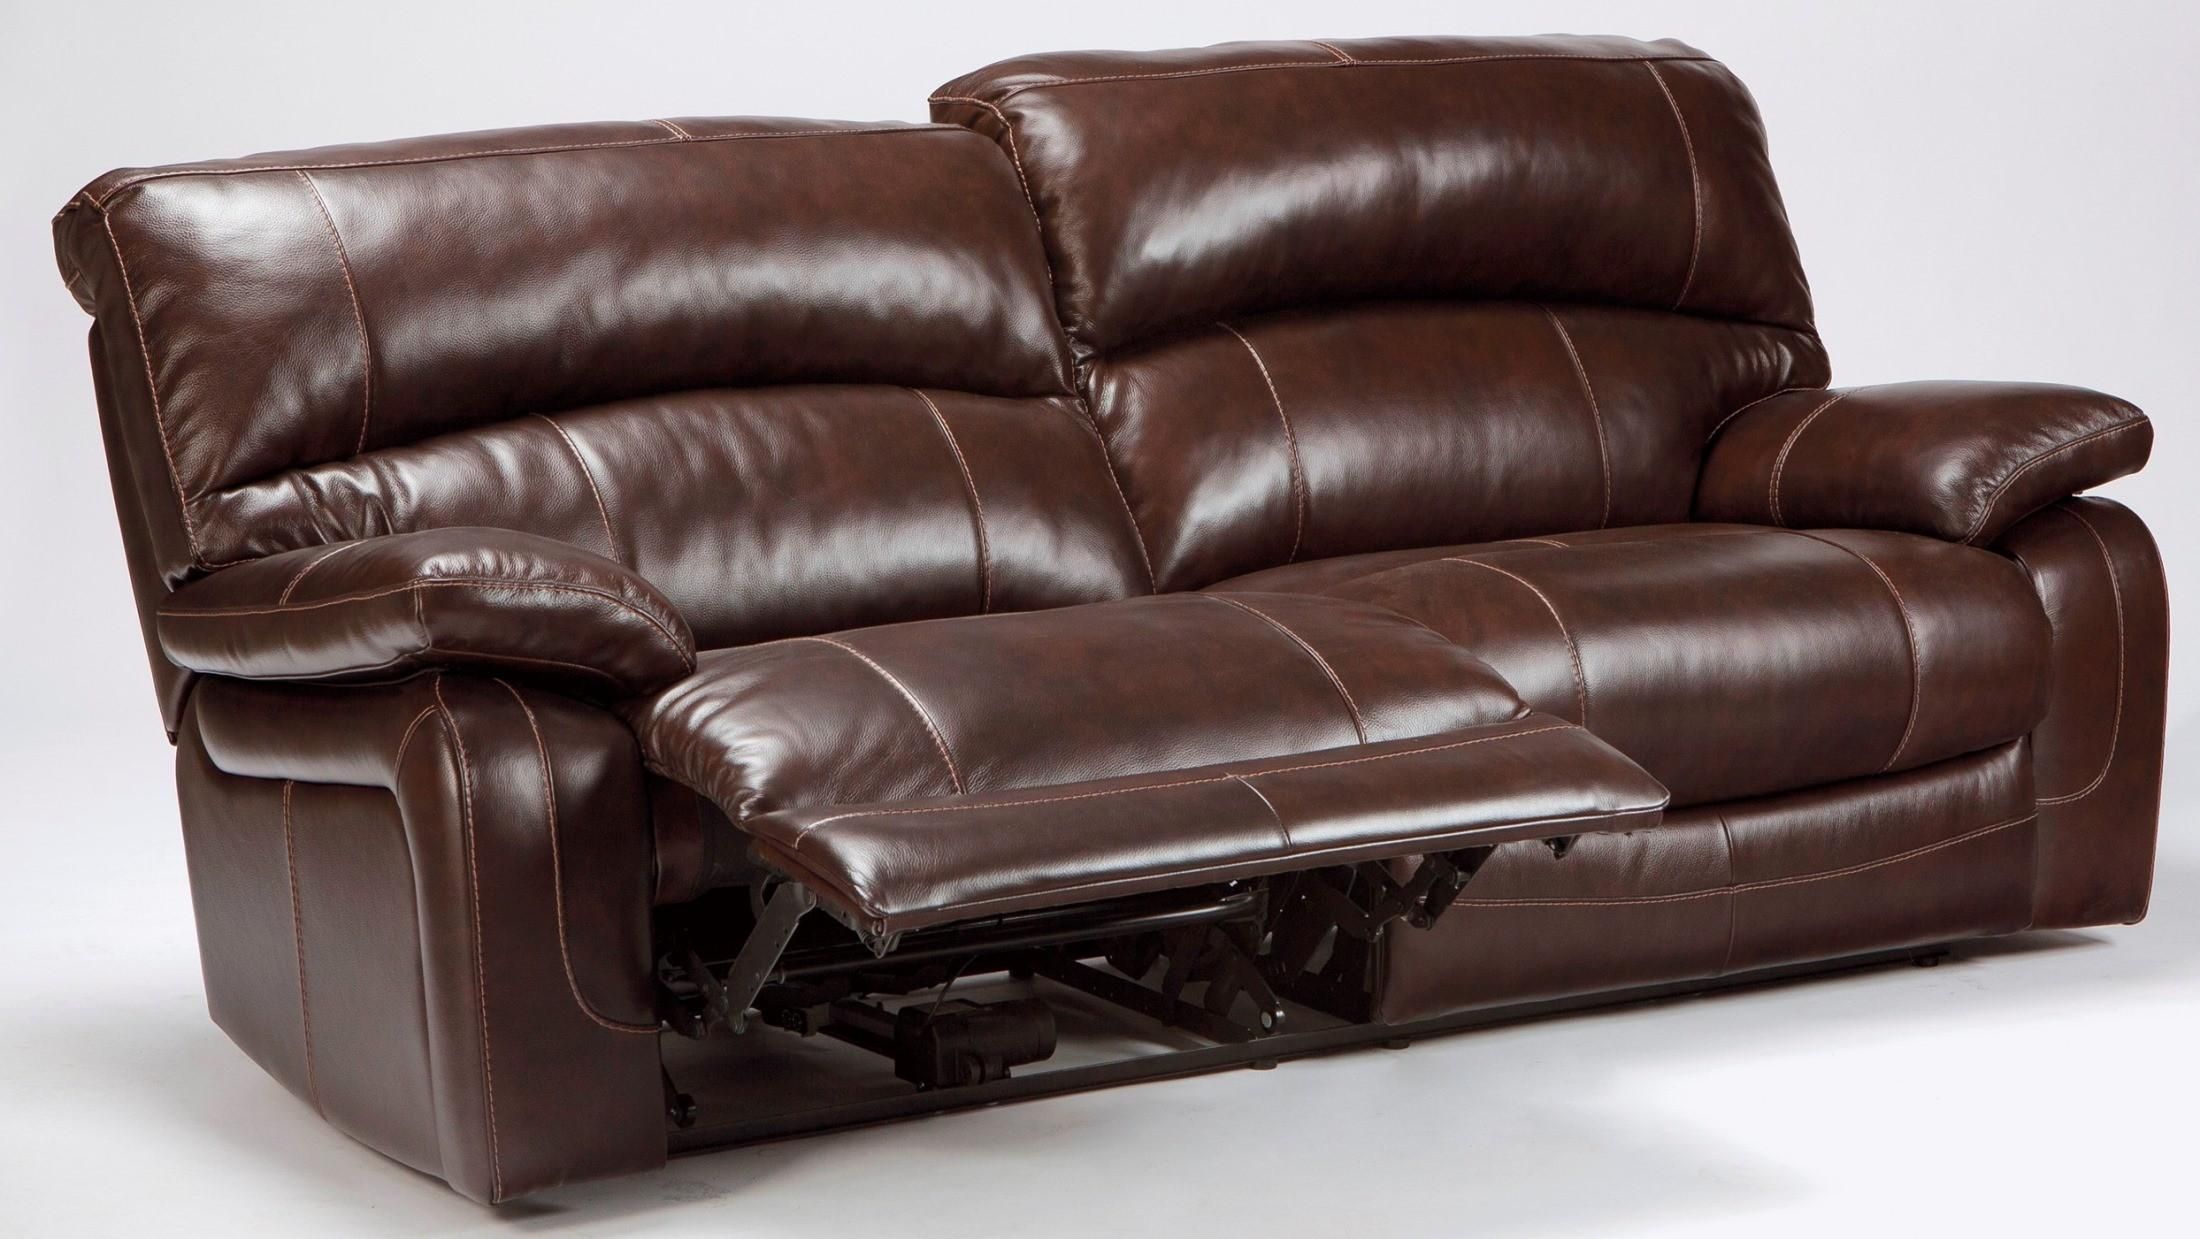 Damacio Dark Brown 2 Seat Power Reclining Sofa From Ashley With Recliner Sofa Chairs (View 5 of 20)